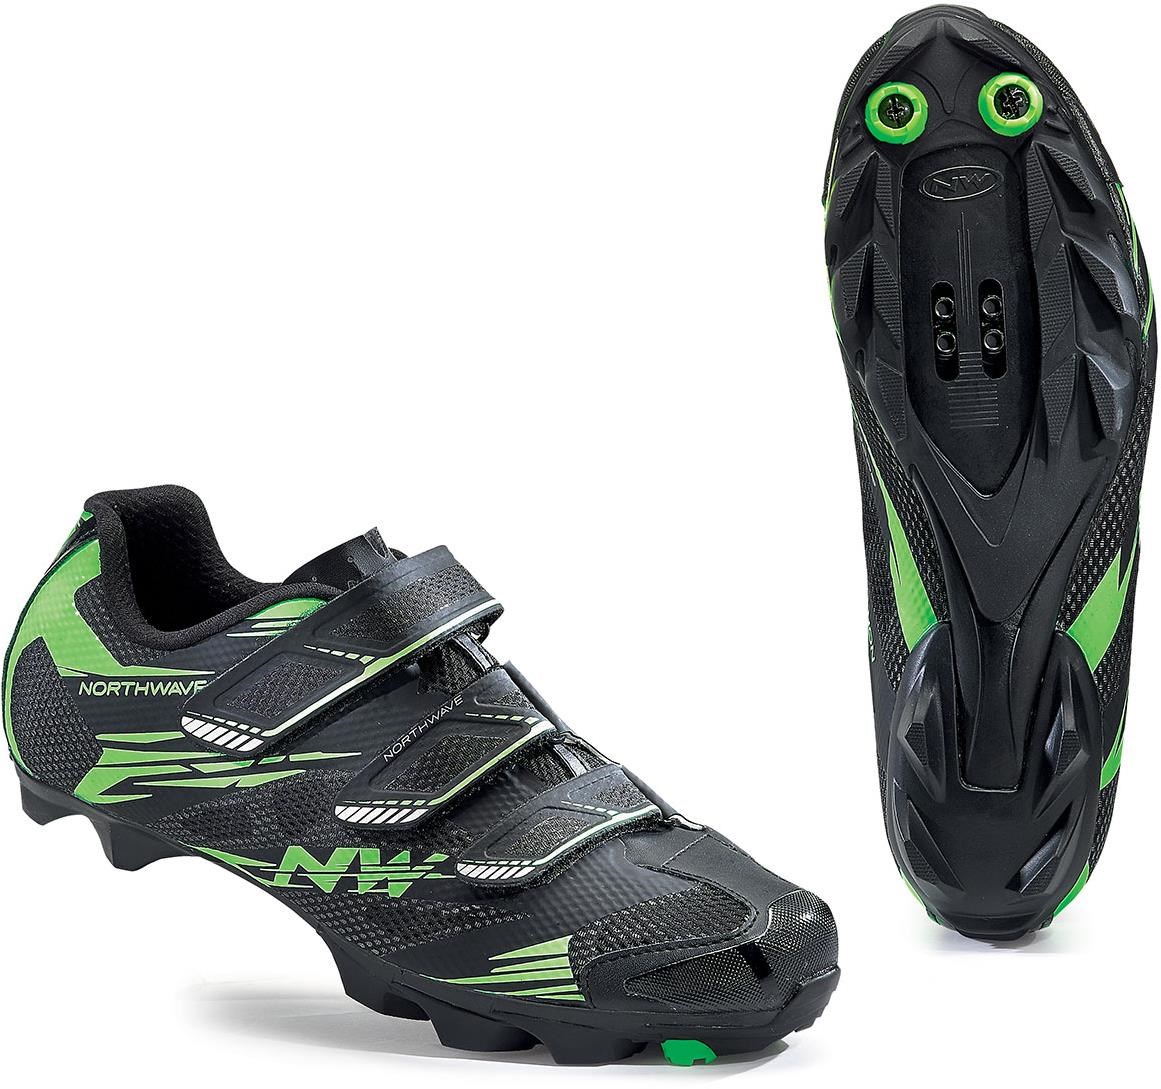 Northwave Scorpius 2 SPD MTB Cycling Shoes product image